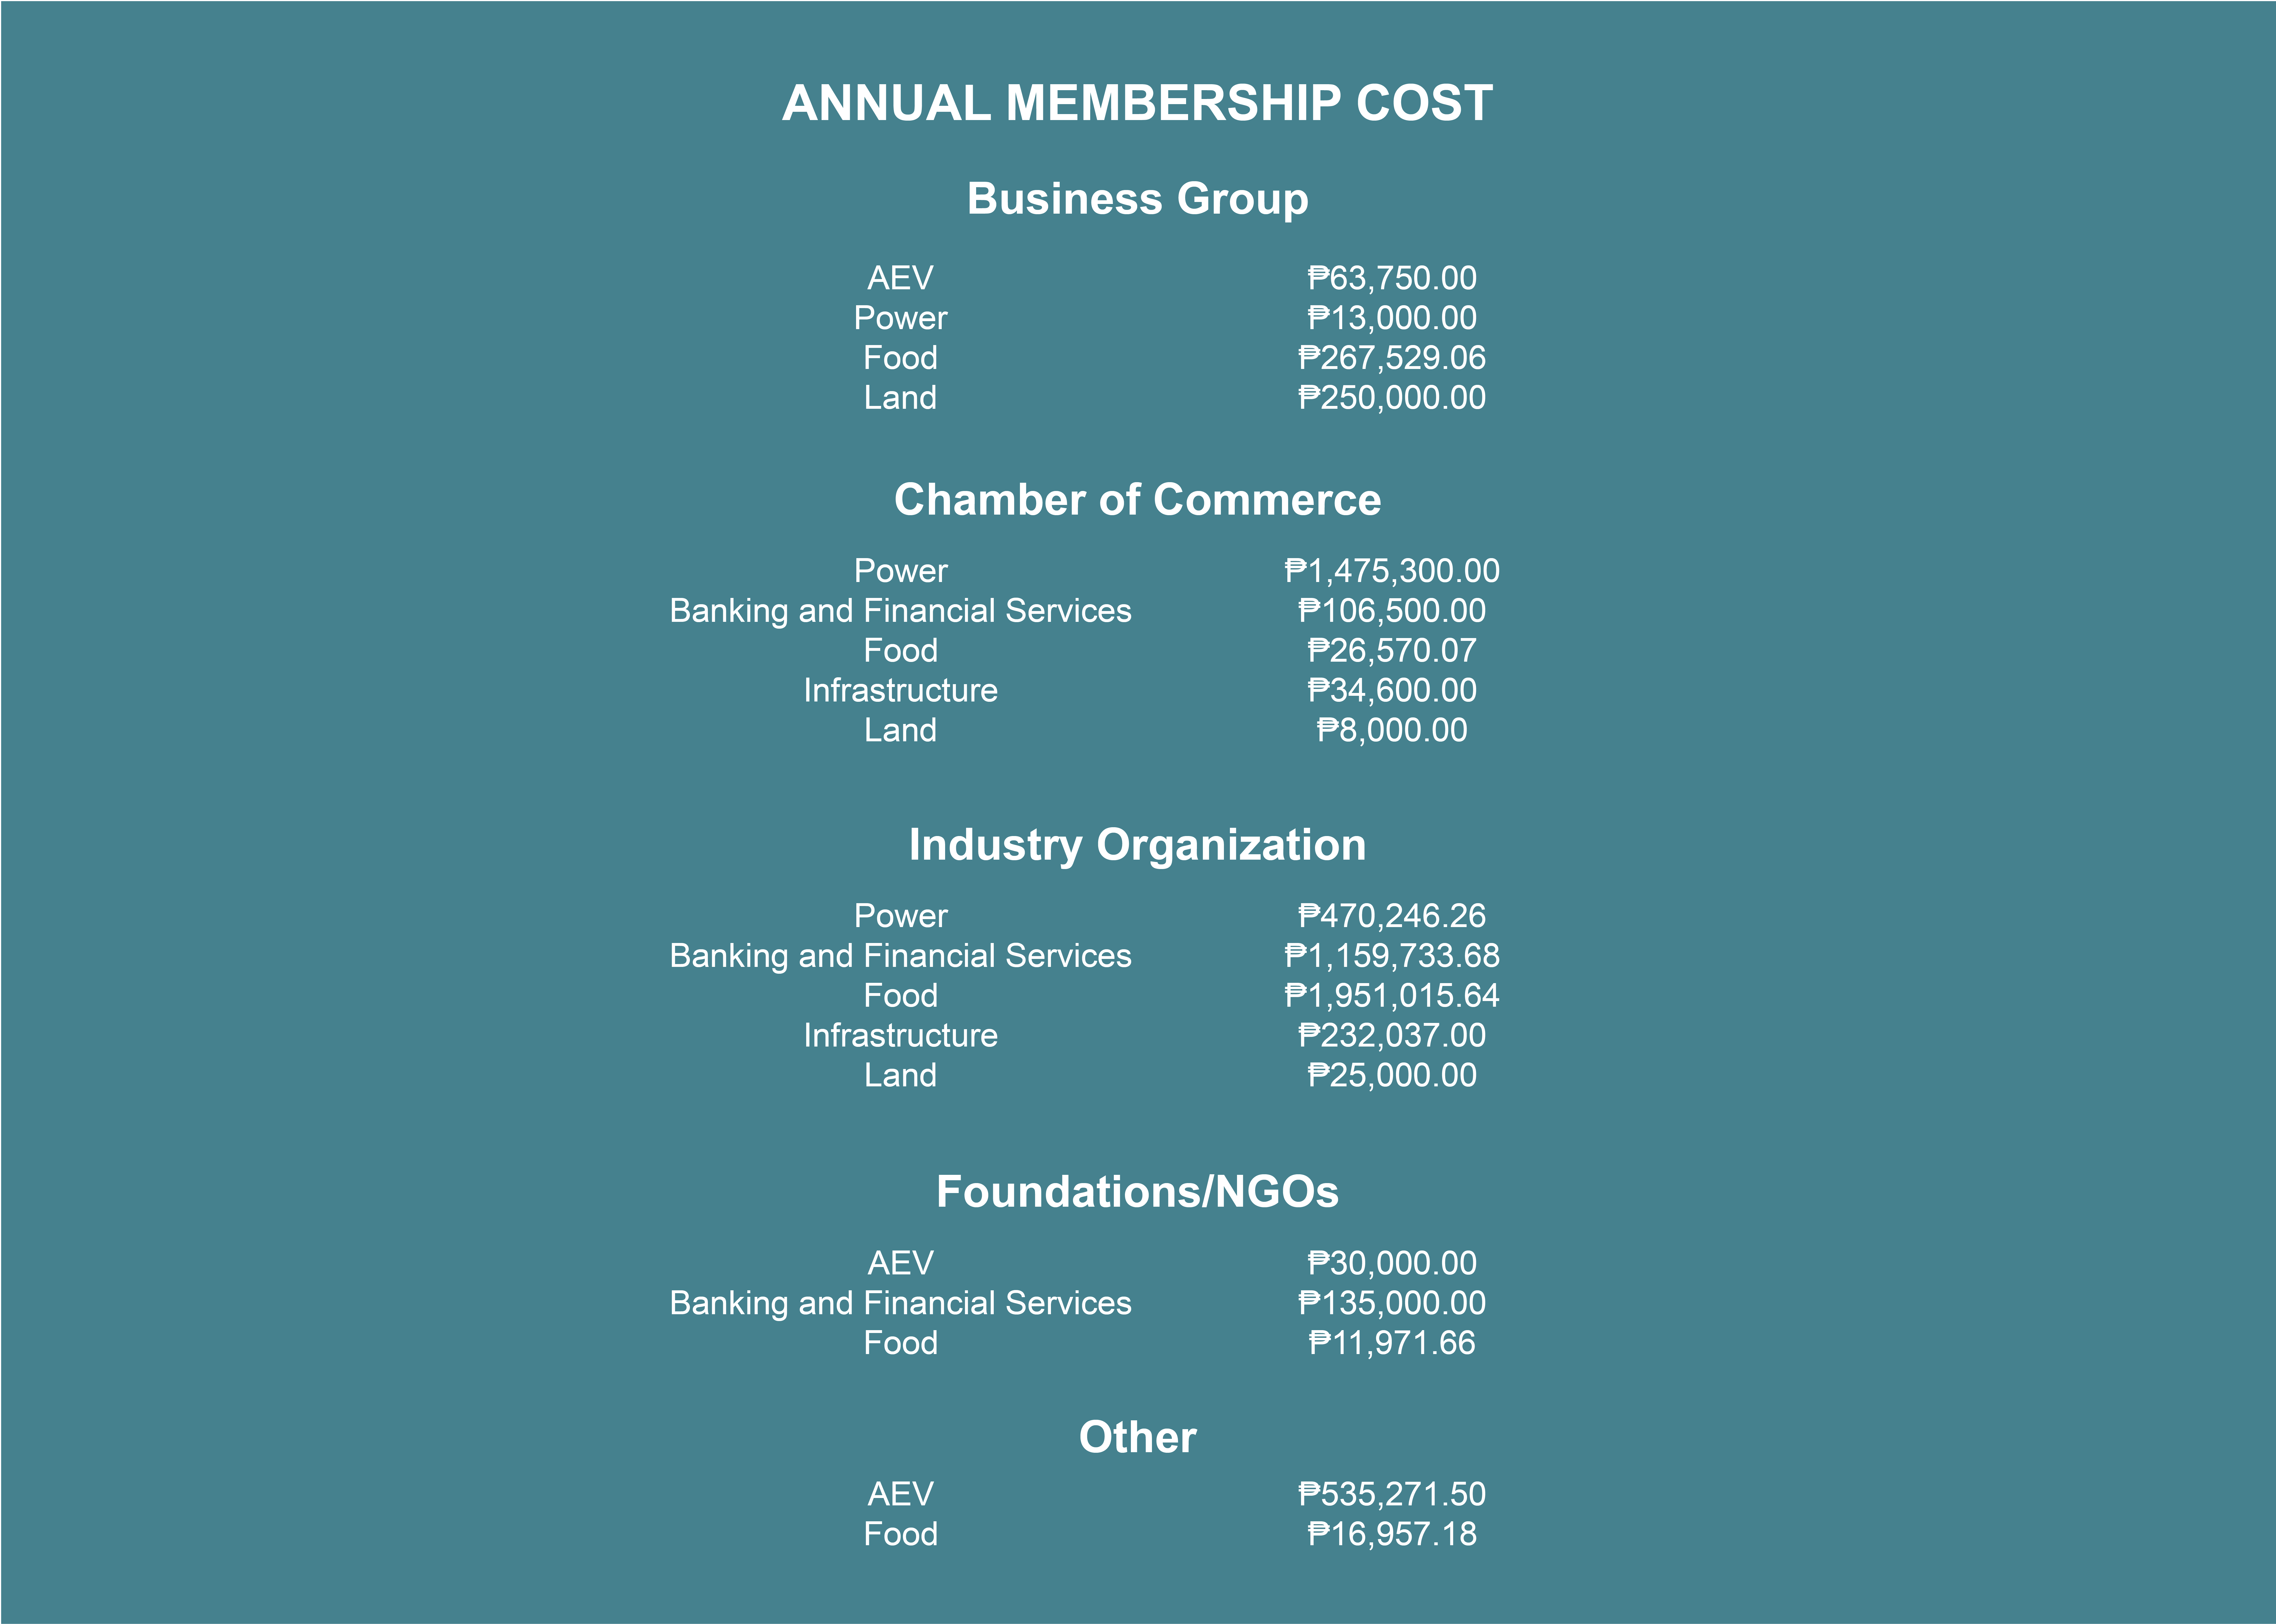 Industry Organizations Contributions and Expenditures